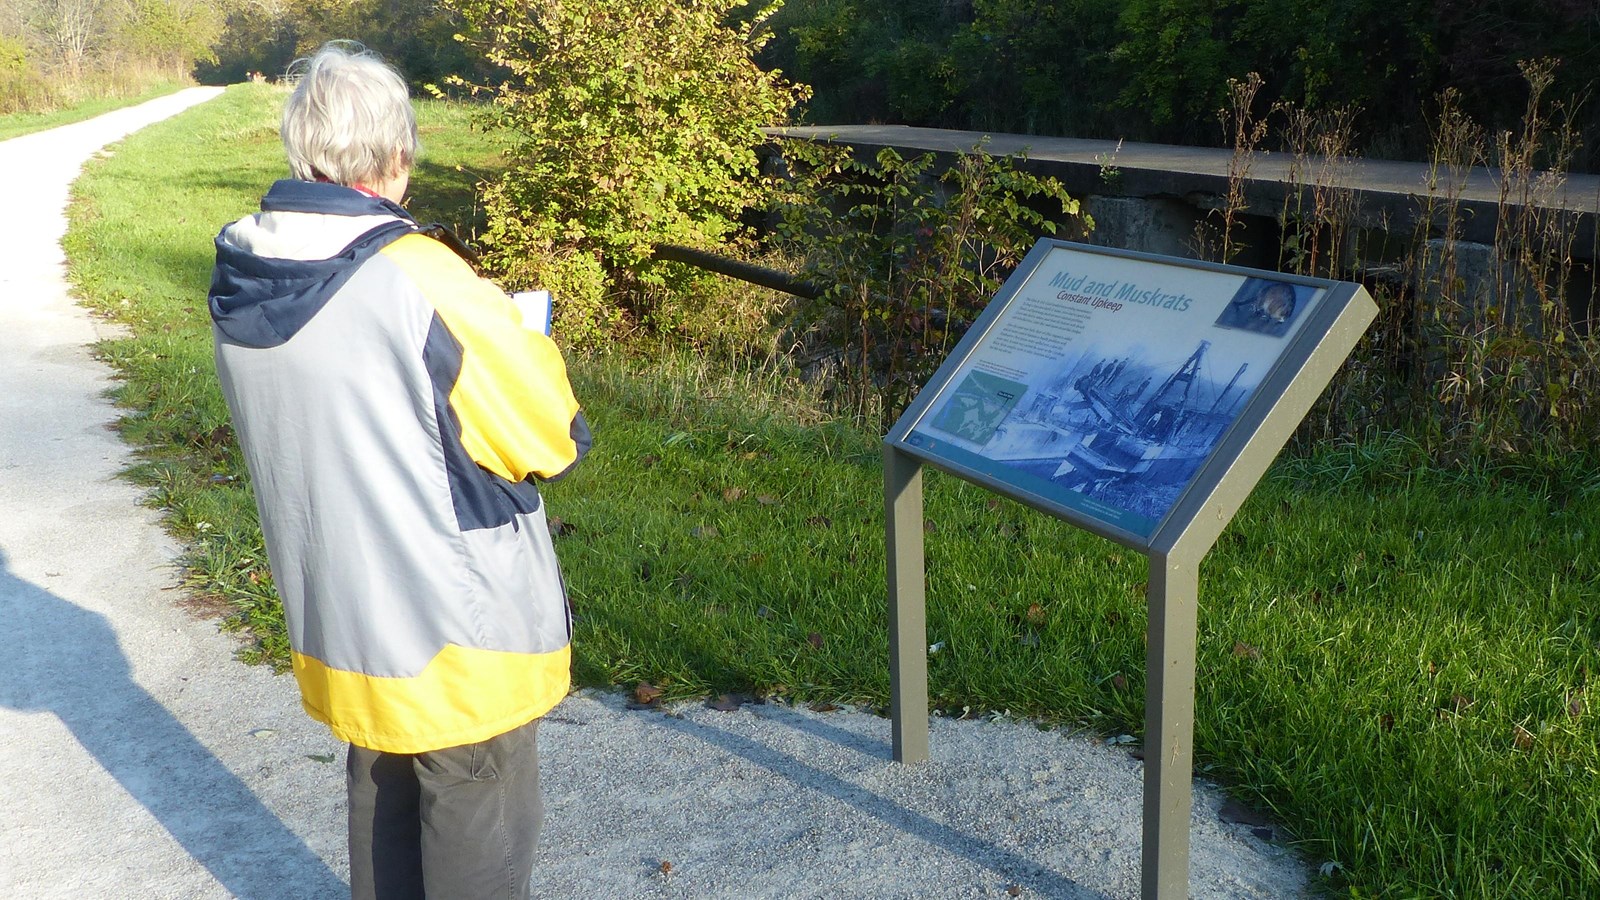 A grey-haired woman in a raincoat stands before a graphic panel along an unpaved trail.